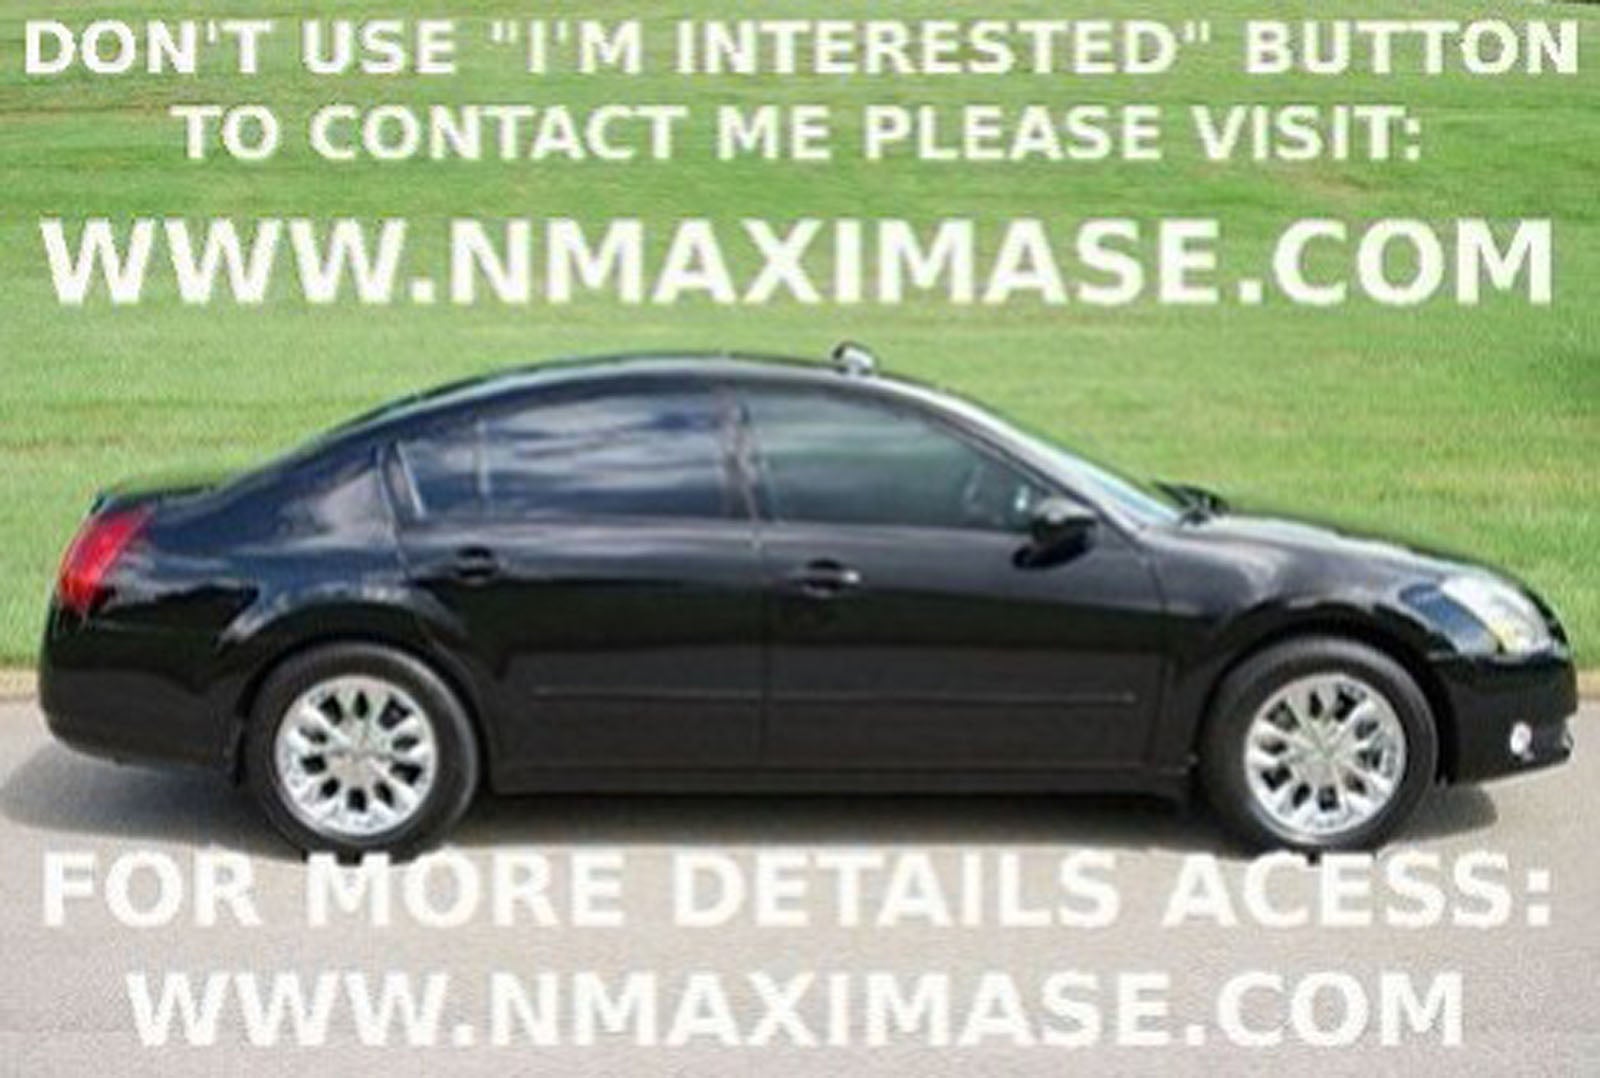 Nissan maxima for sale in ma #7